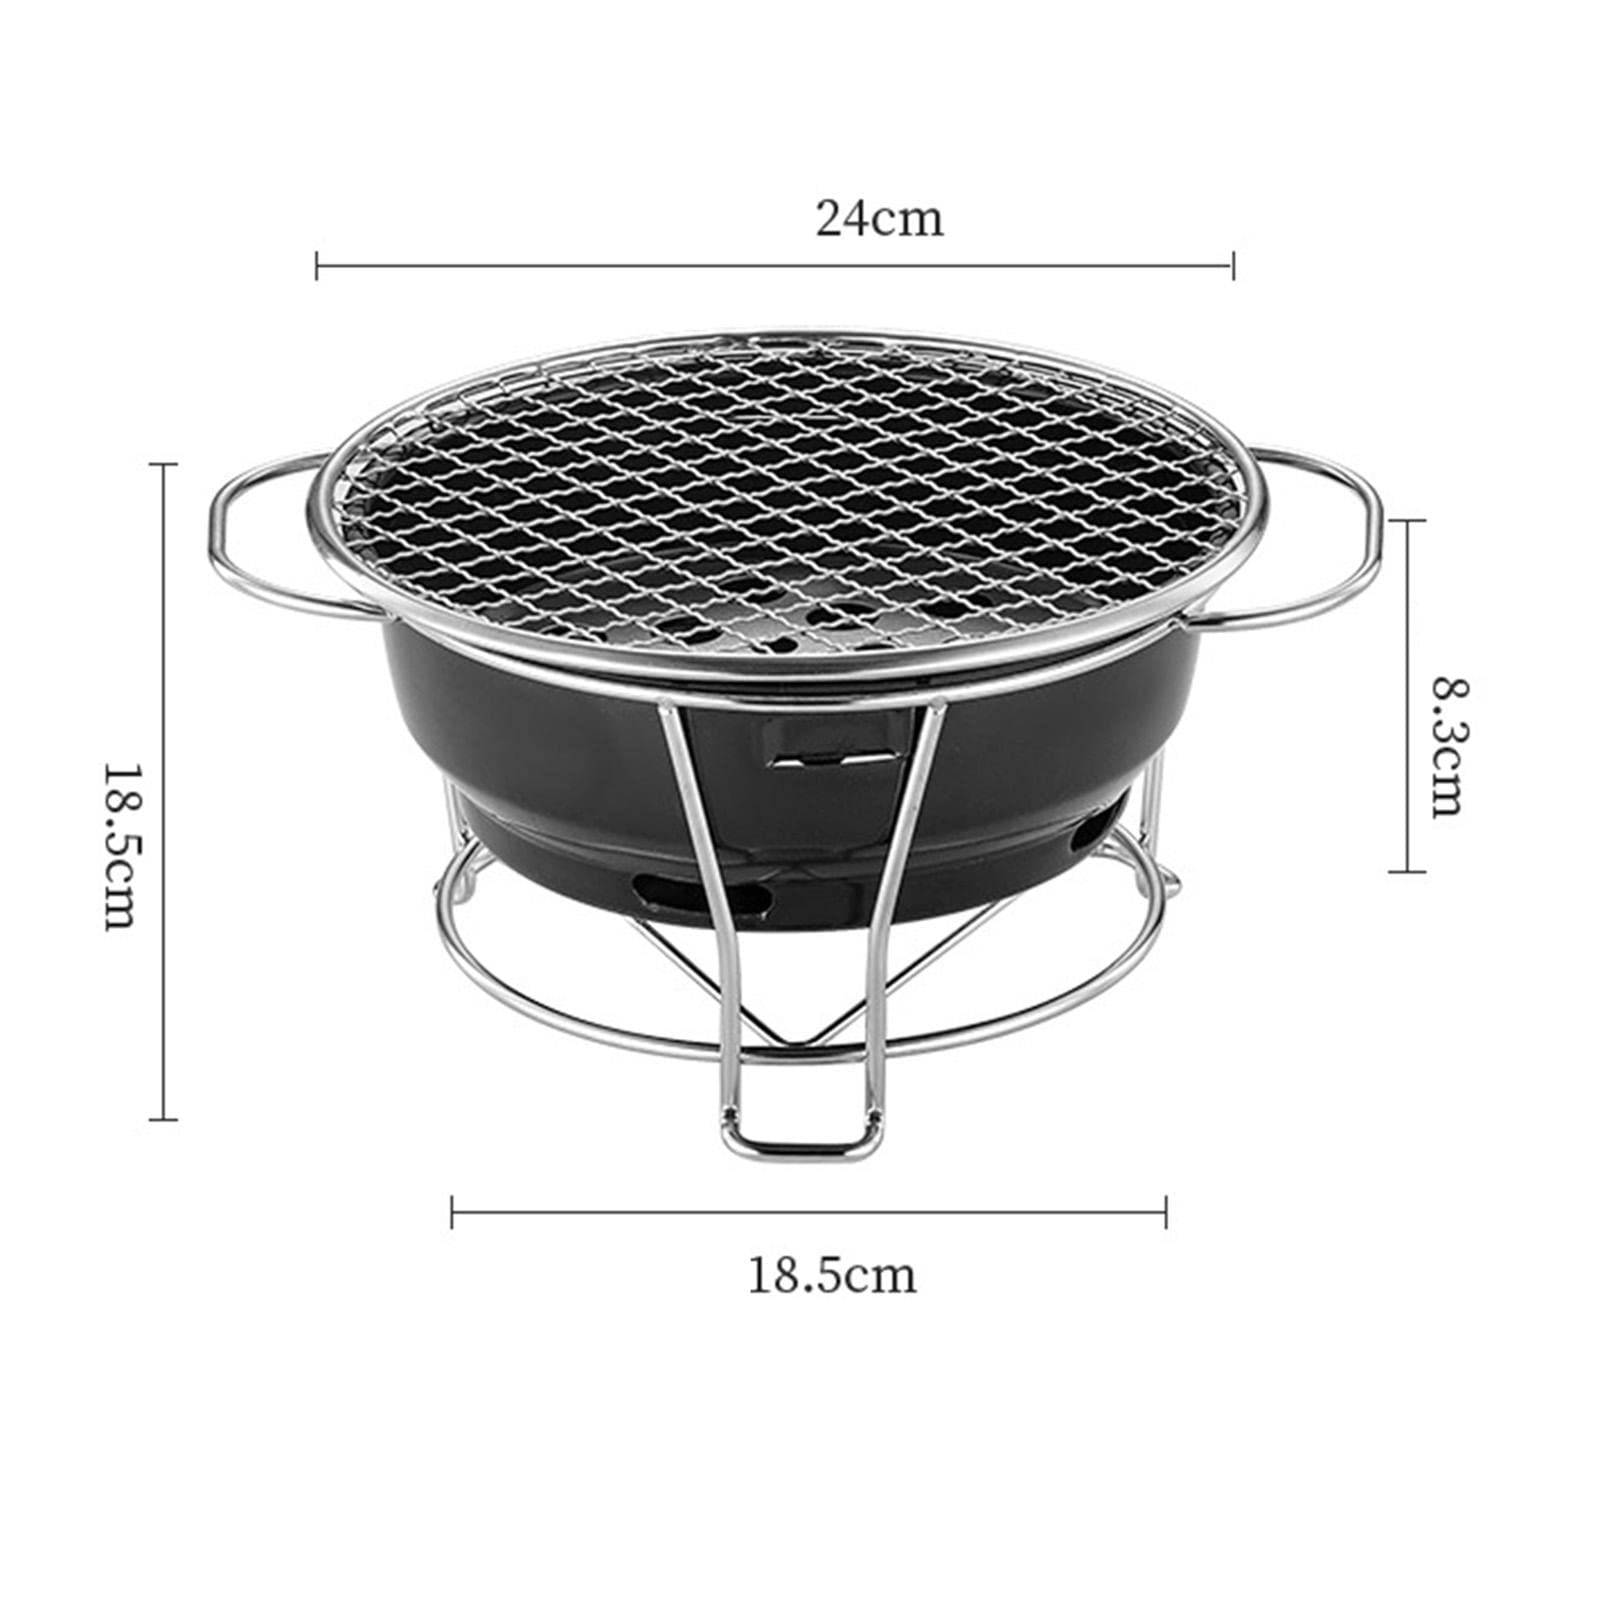 Korean Charcoal Grill Camping Grilling Meat Steak Household Portable BBQ Stove Cooking for Outdoor Backpacking Patio Picnic Travel, with Pot Rack Pan